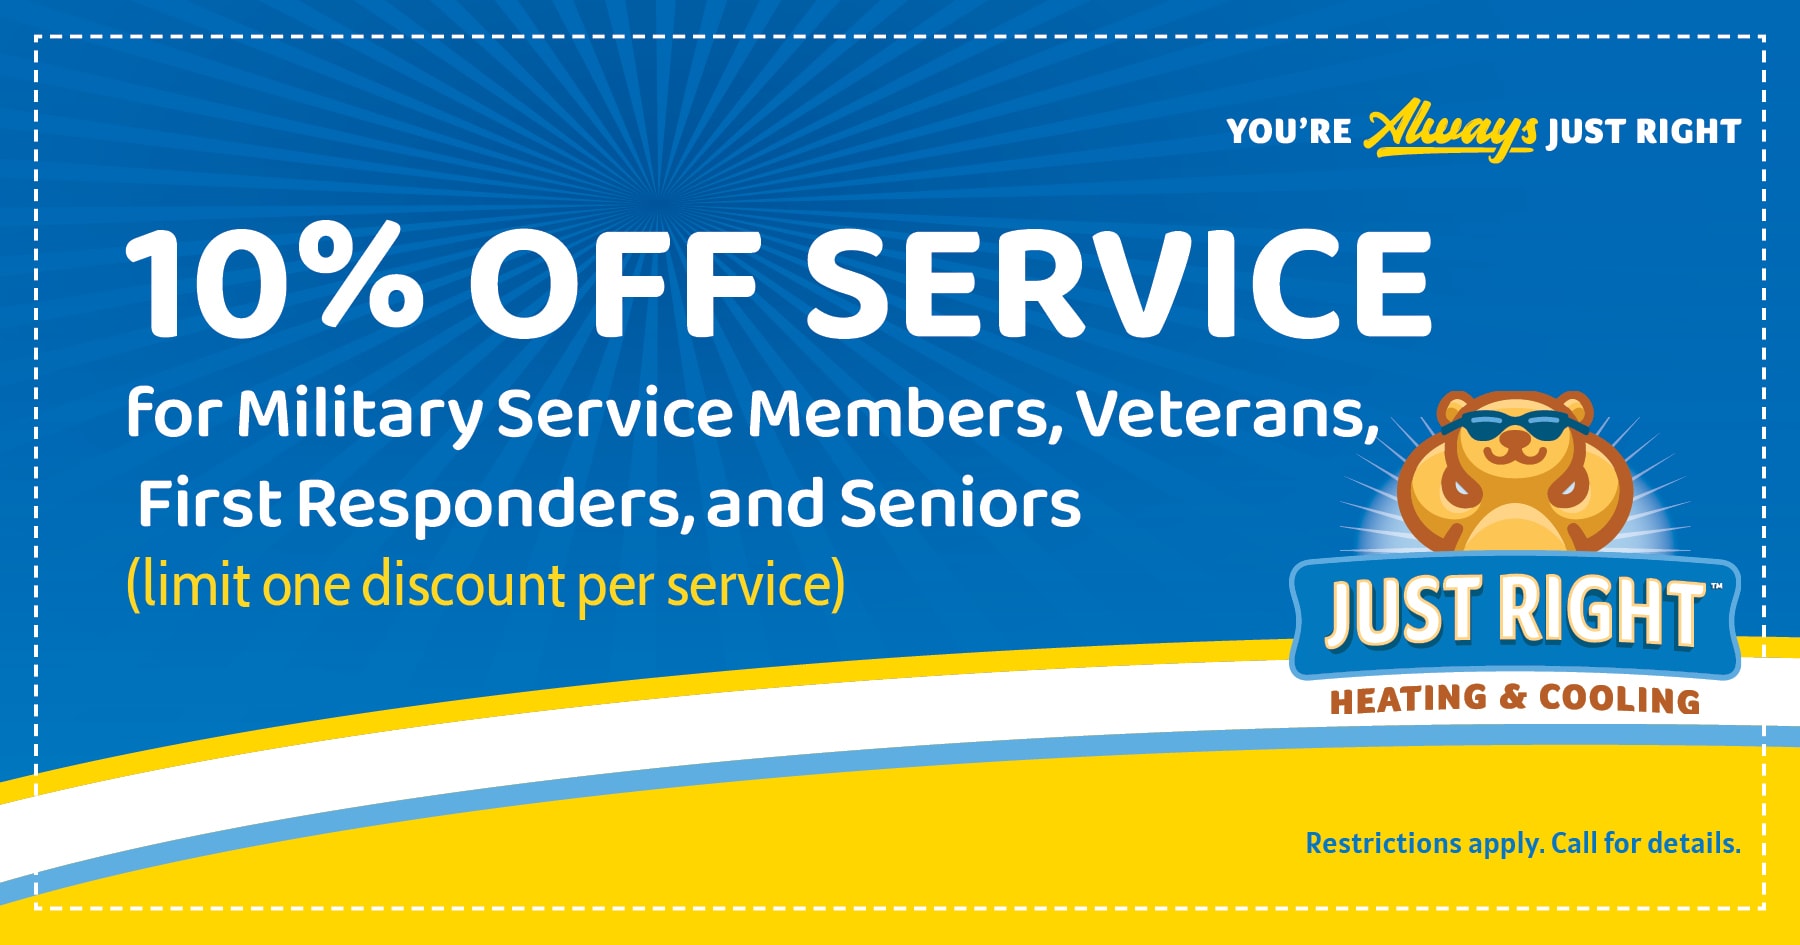 10% off service for Military Service Members, Veterans, First Responders, and Seniors. (limit one discount per service)